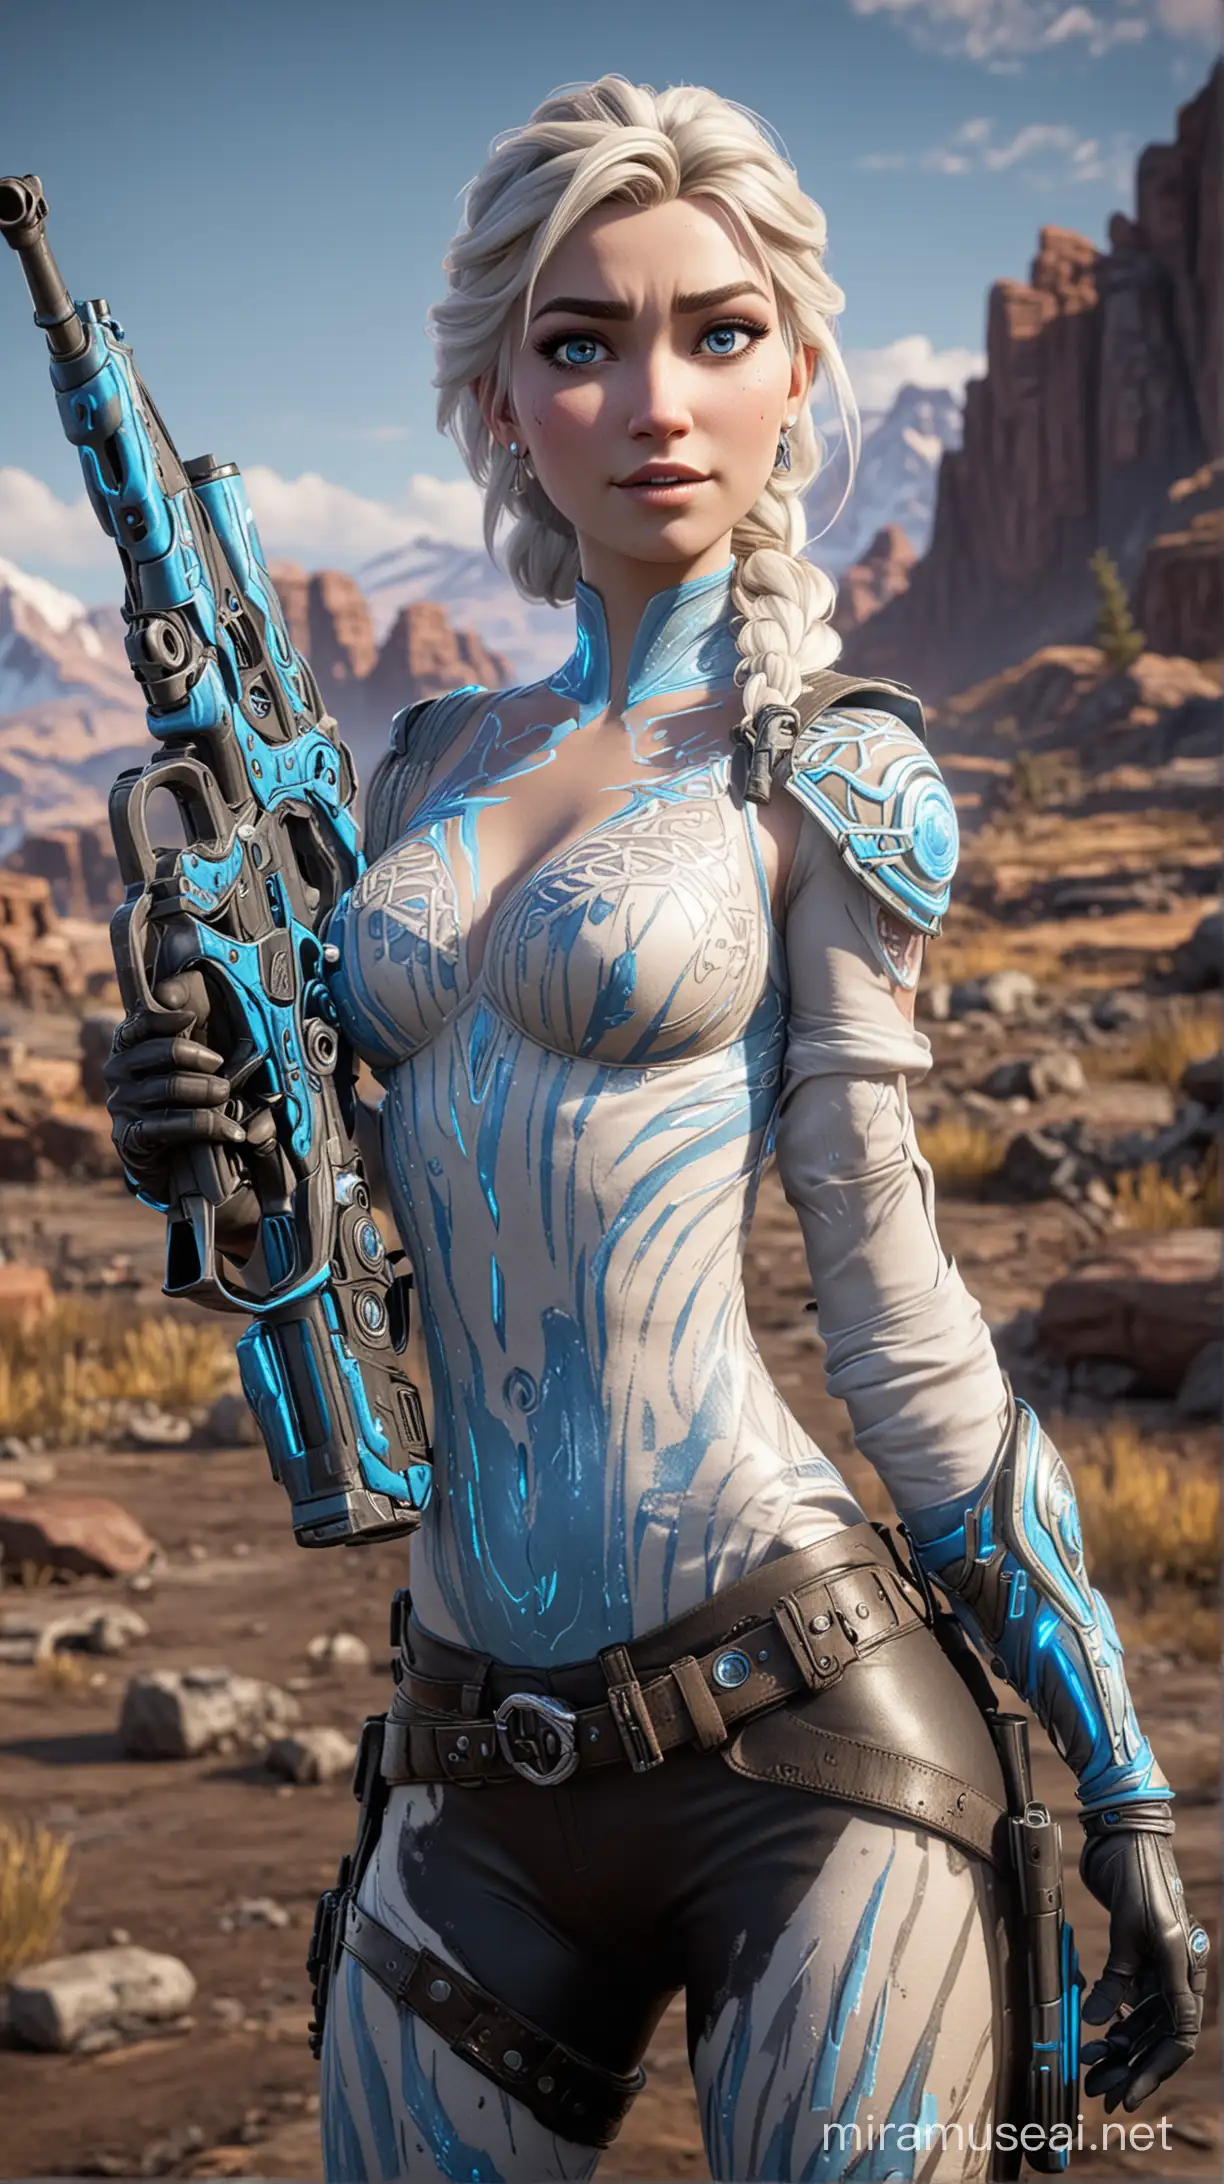 Elsa From Frozen in Borderlands 3 as a siren with glowing bright blue swirl markings in her skin on her arms and face, holding a large Gun in her hands. with borderlands scenery in the background.